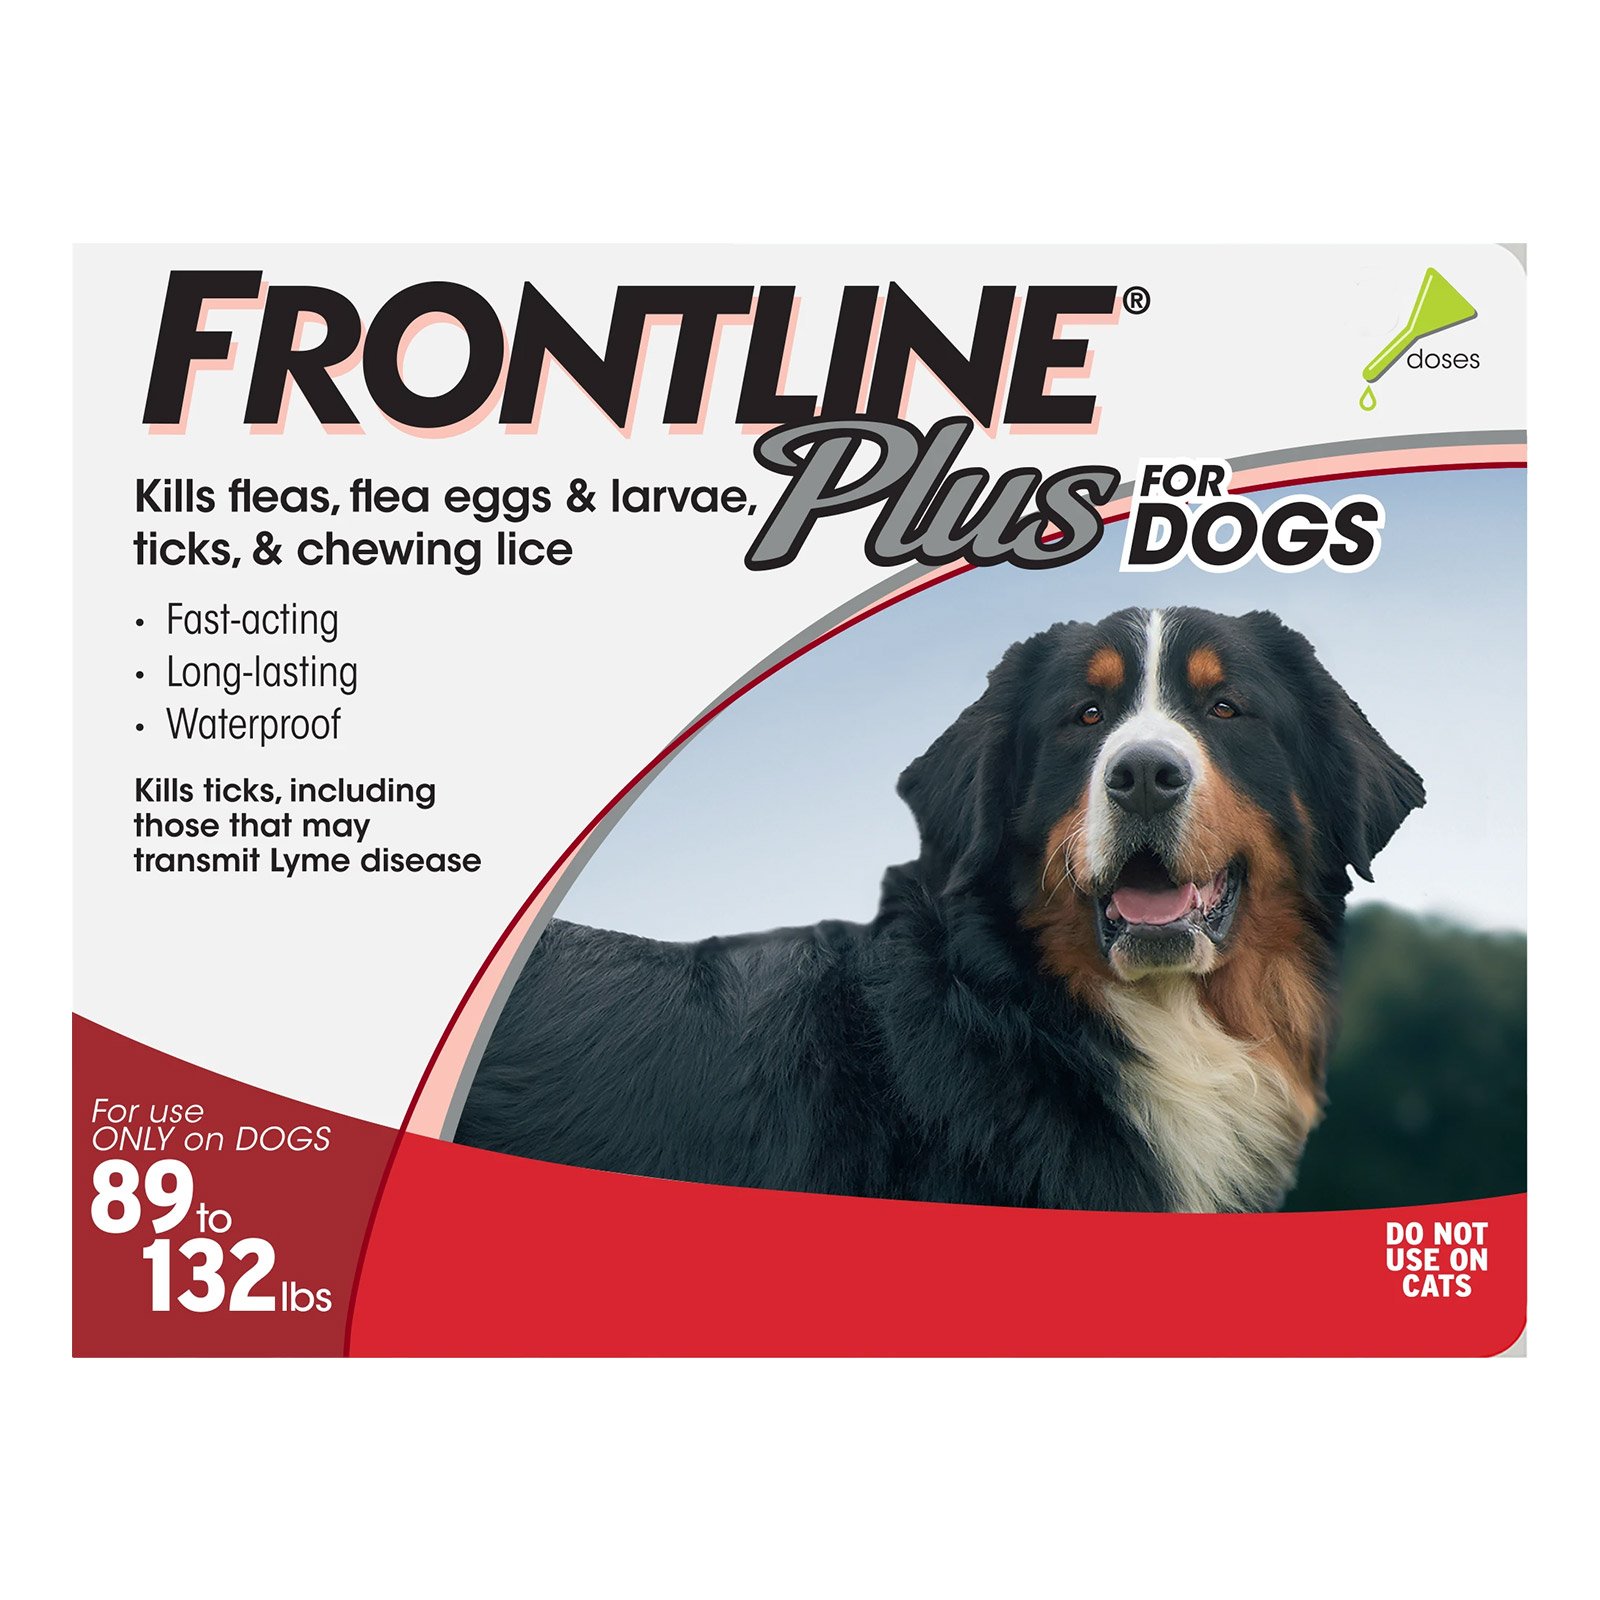 Frontline-Plus-for-Extra-Large-Dogs-over-89-lbs-Red.jpg